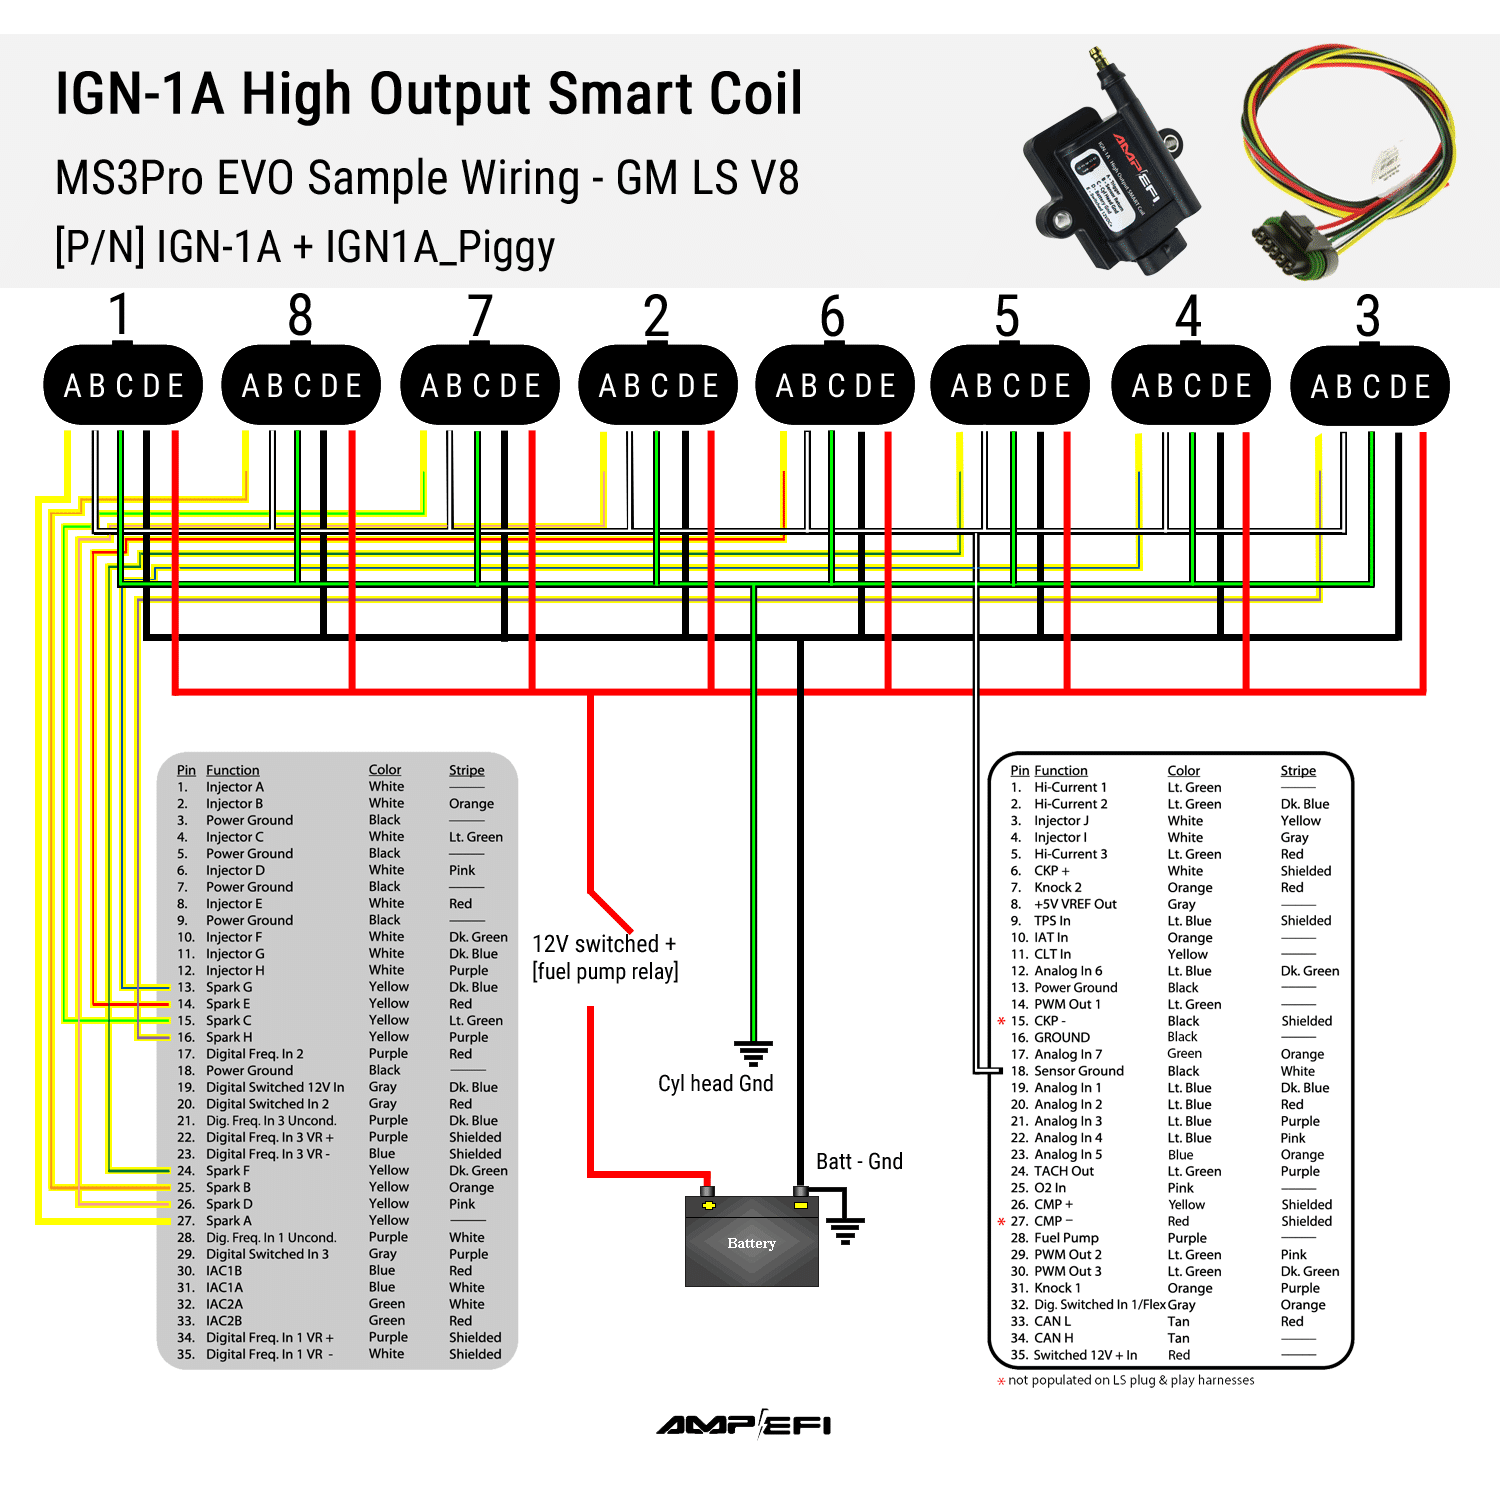 IGN1A Smart Coil Sample Wiring for GM LS